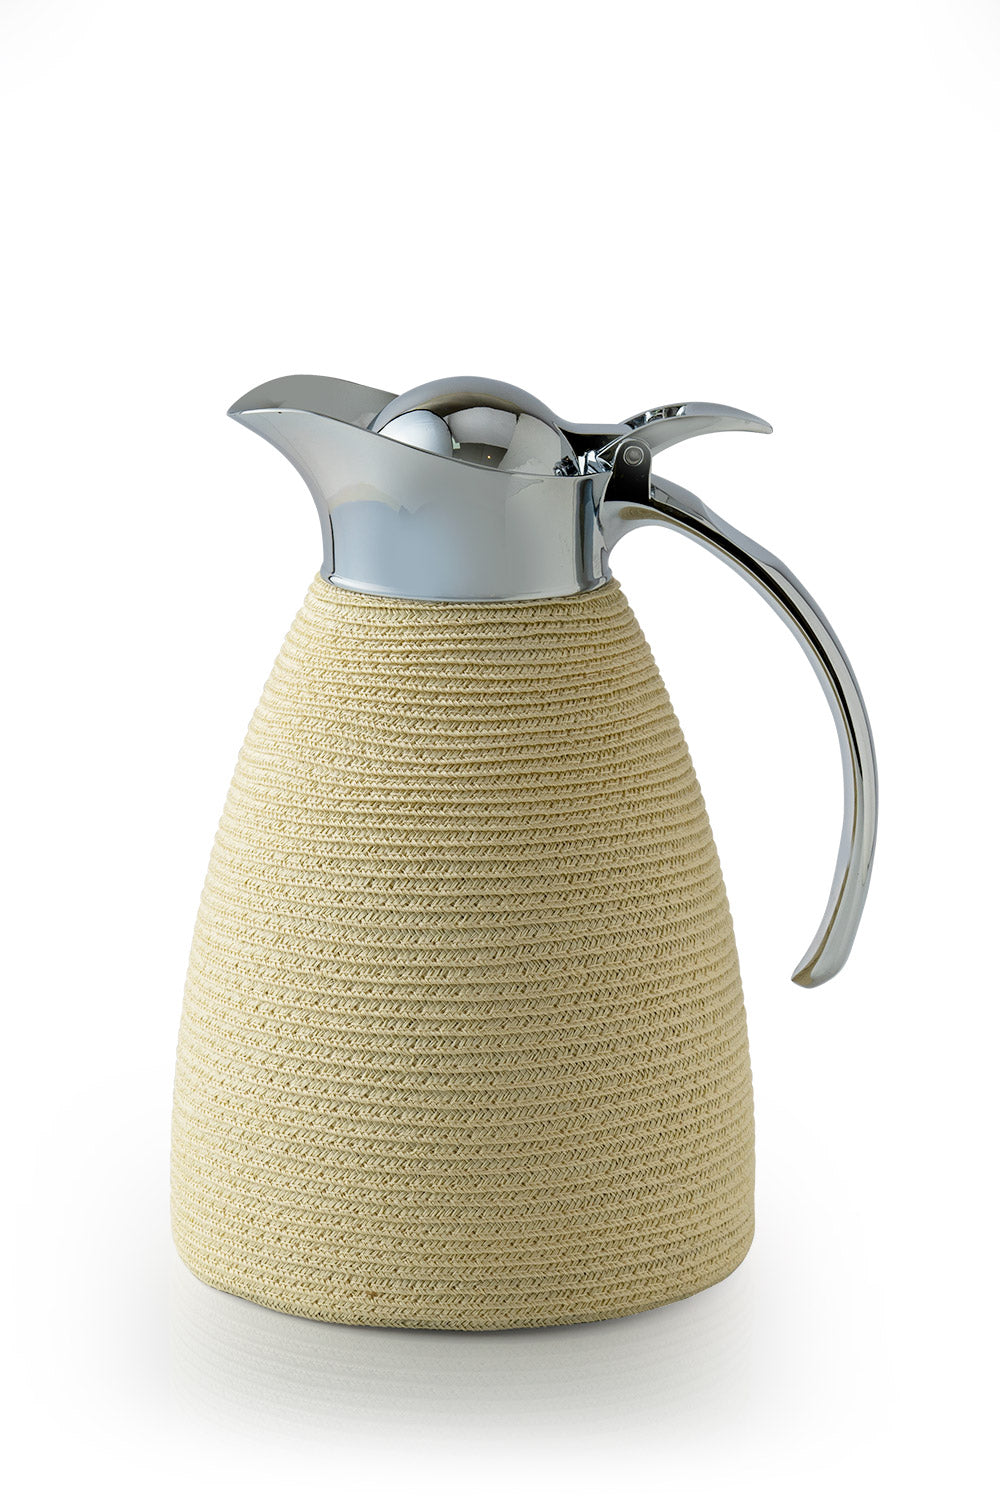 Monceau Thermal Carafe 1L, Ivory - Maison7